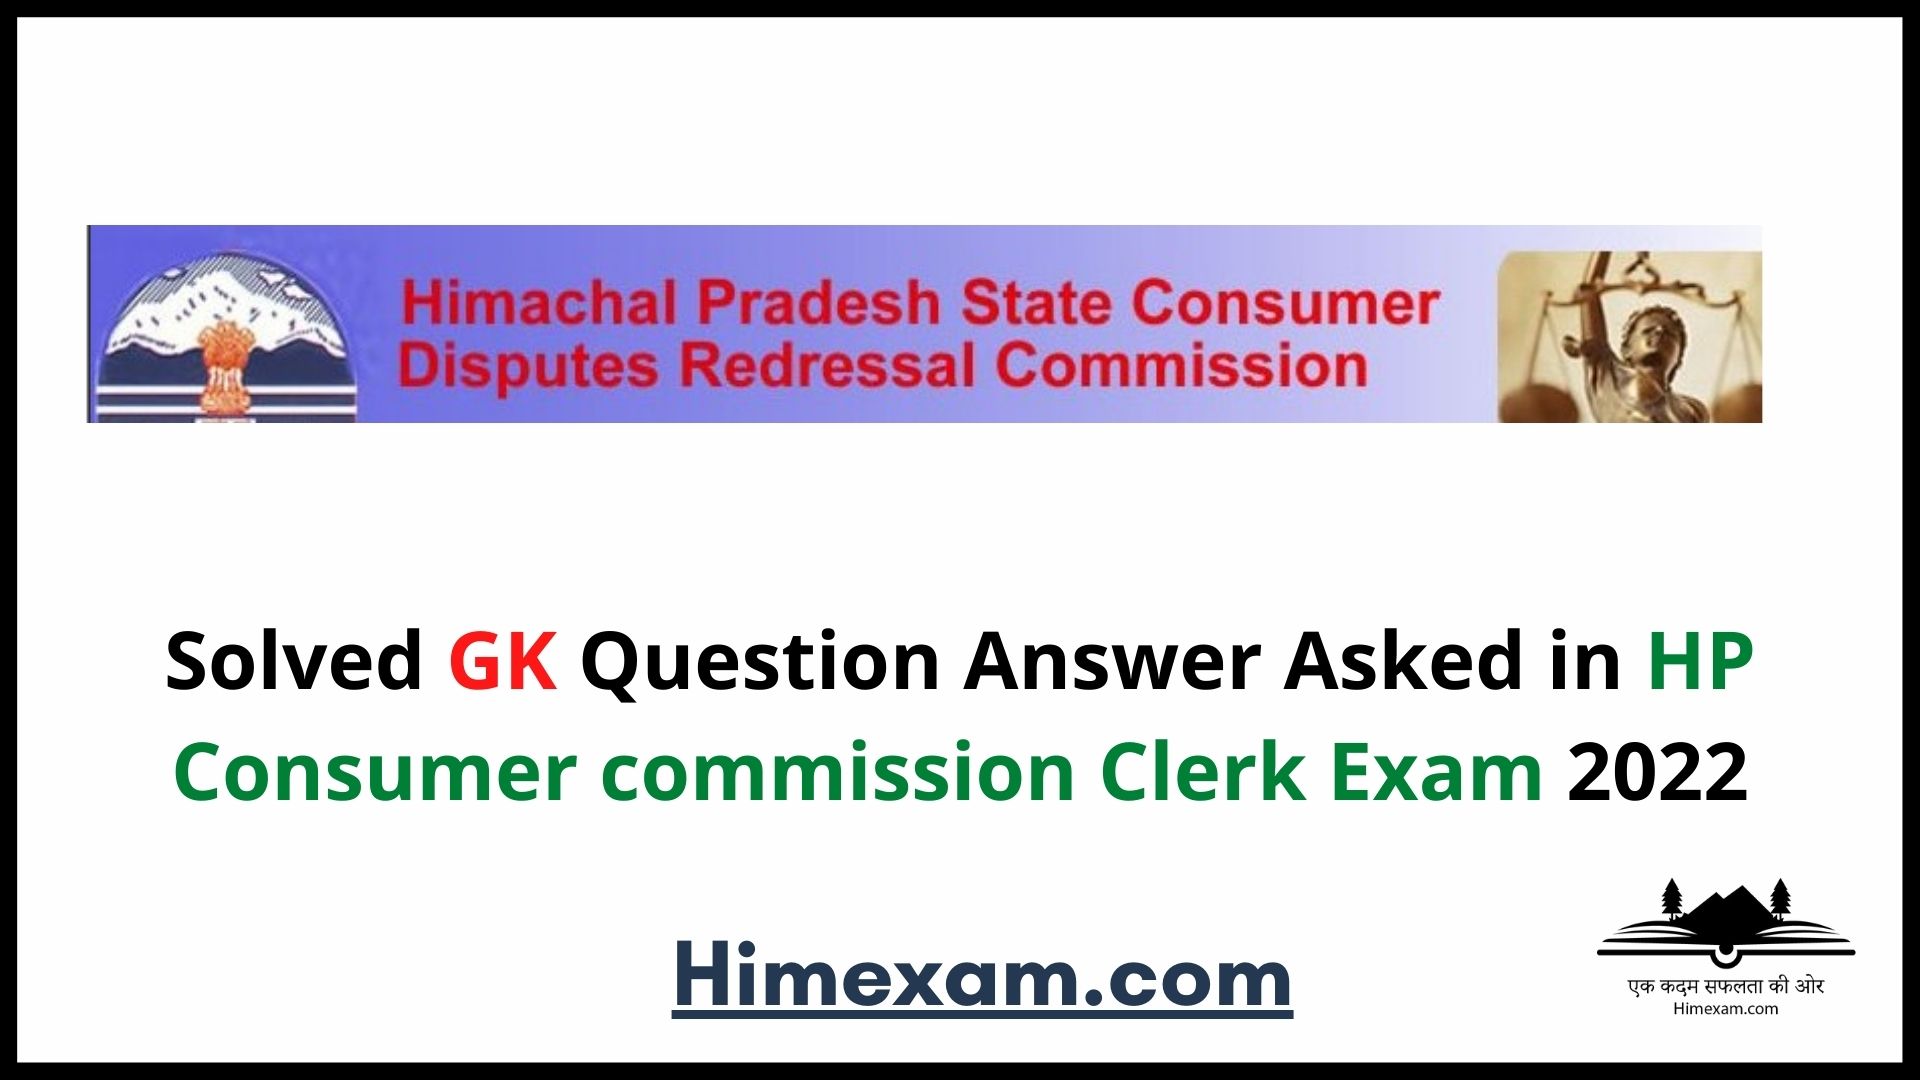 Solved GK Question Answer Asked in HP Consumer commission Clerk Exam 2022